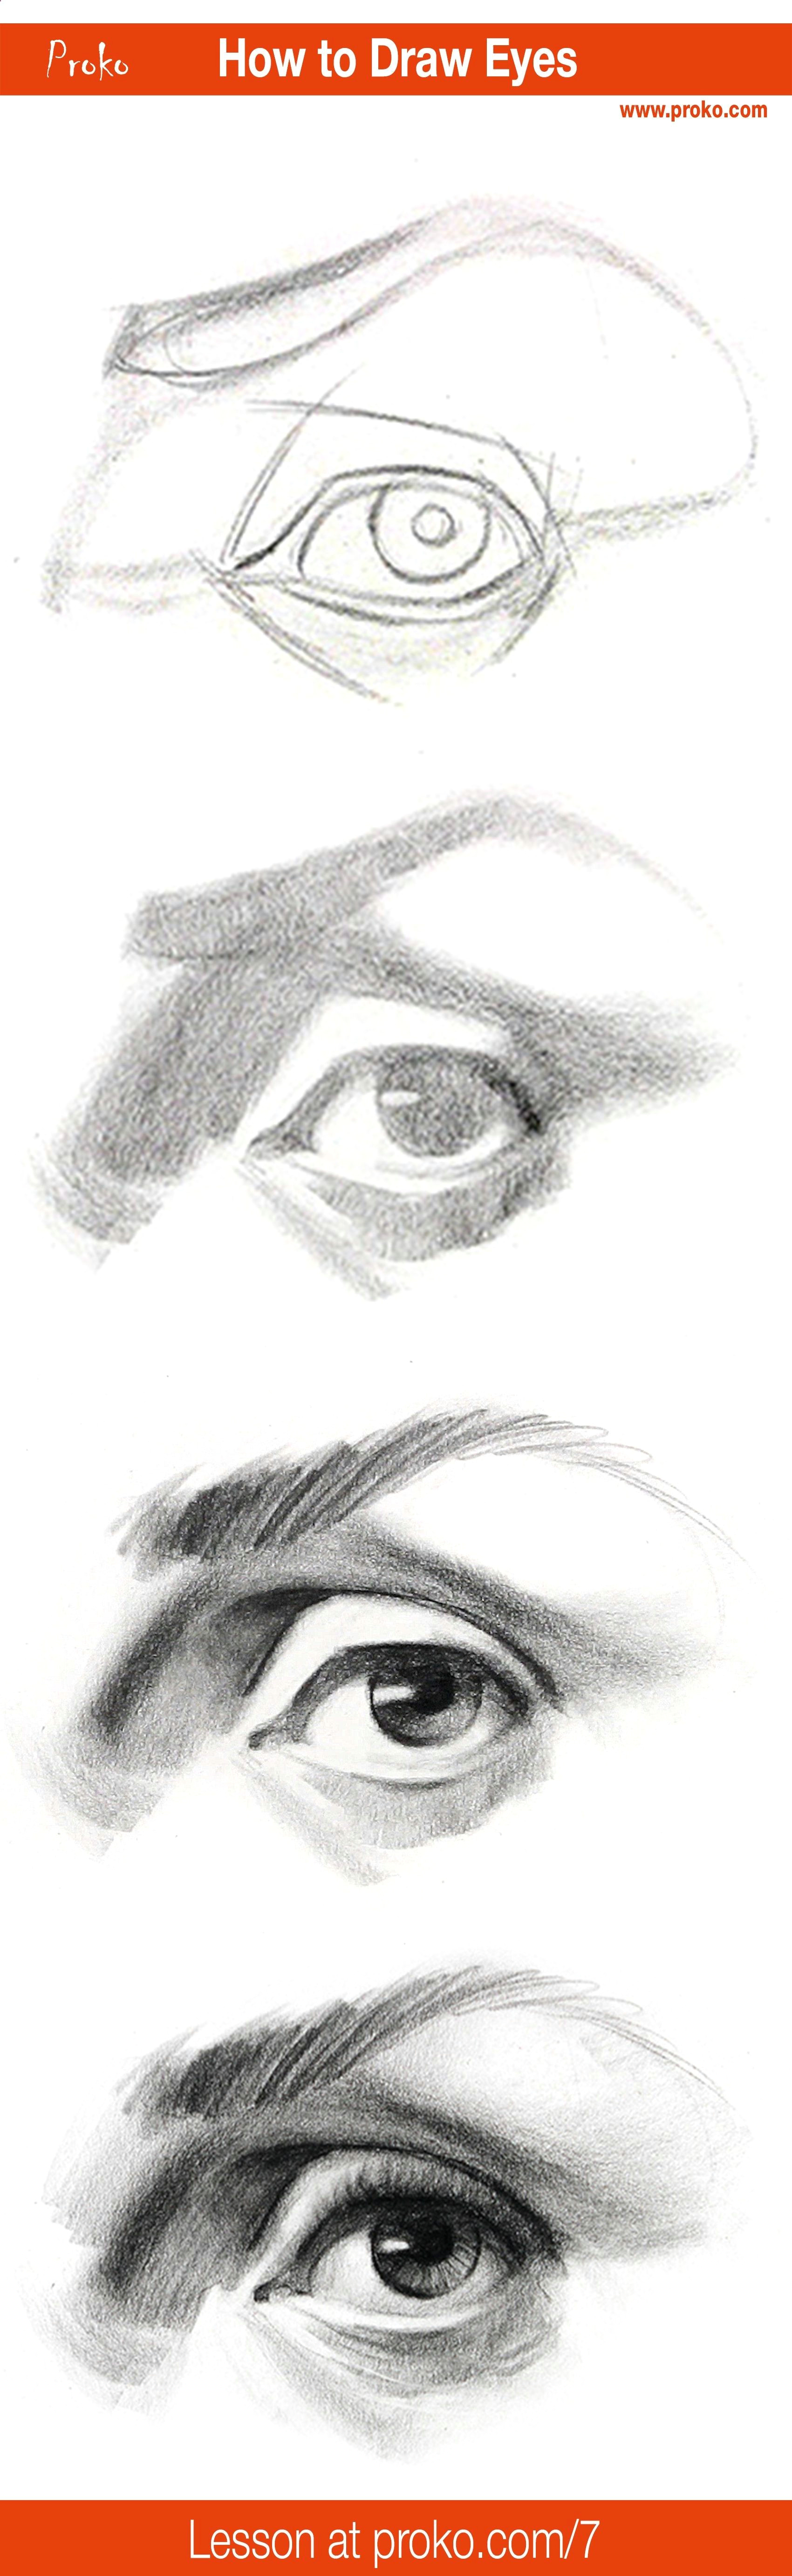 Drawing Realistic Eye Step by Step Drawing Pencil Portraits Draw Realistic Eyes with This Step by